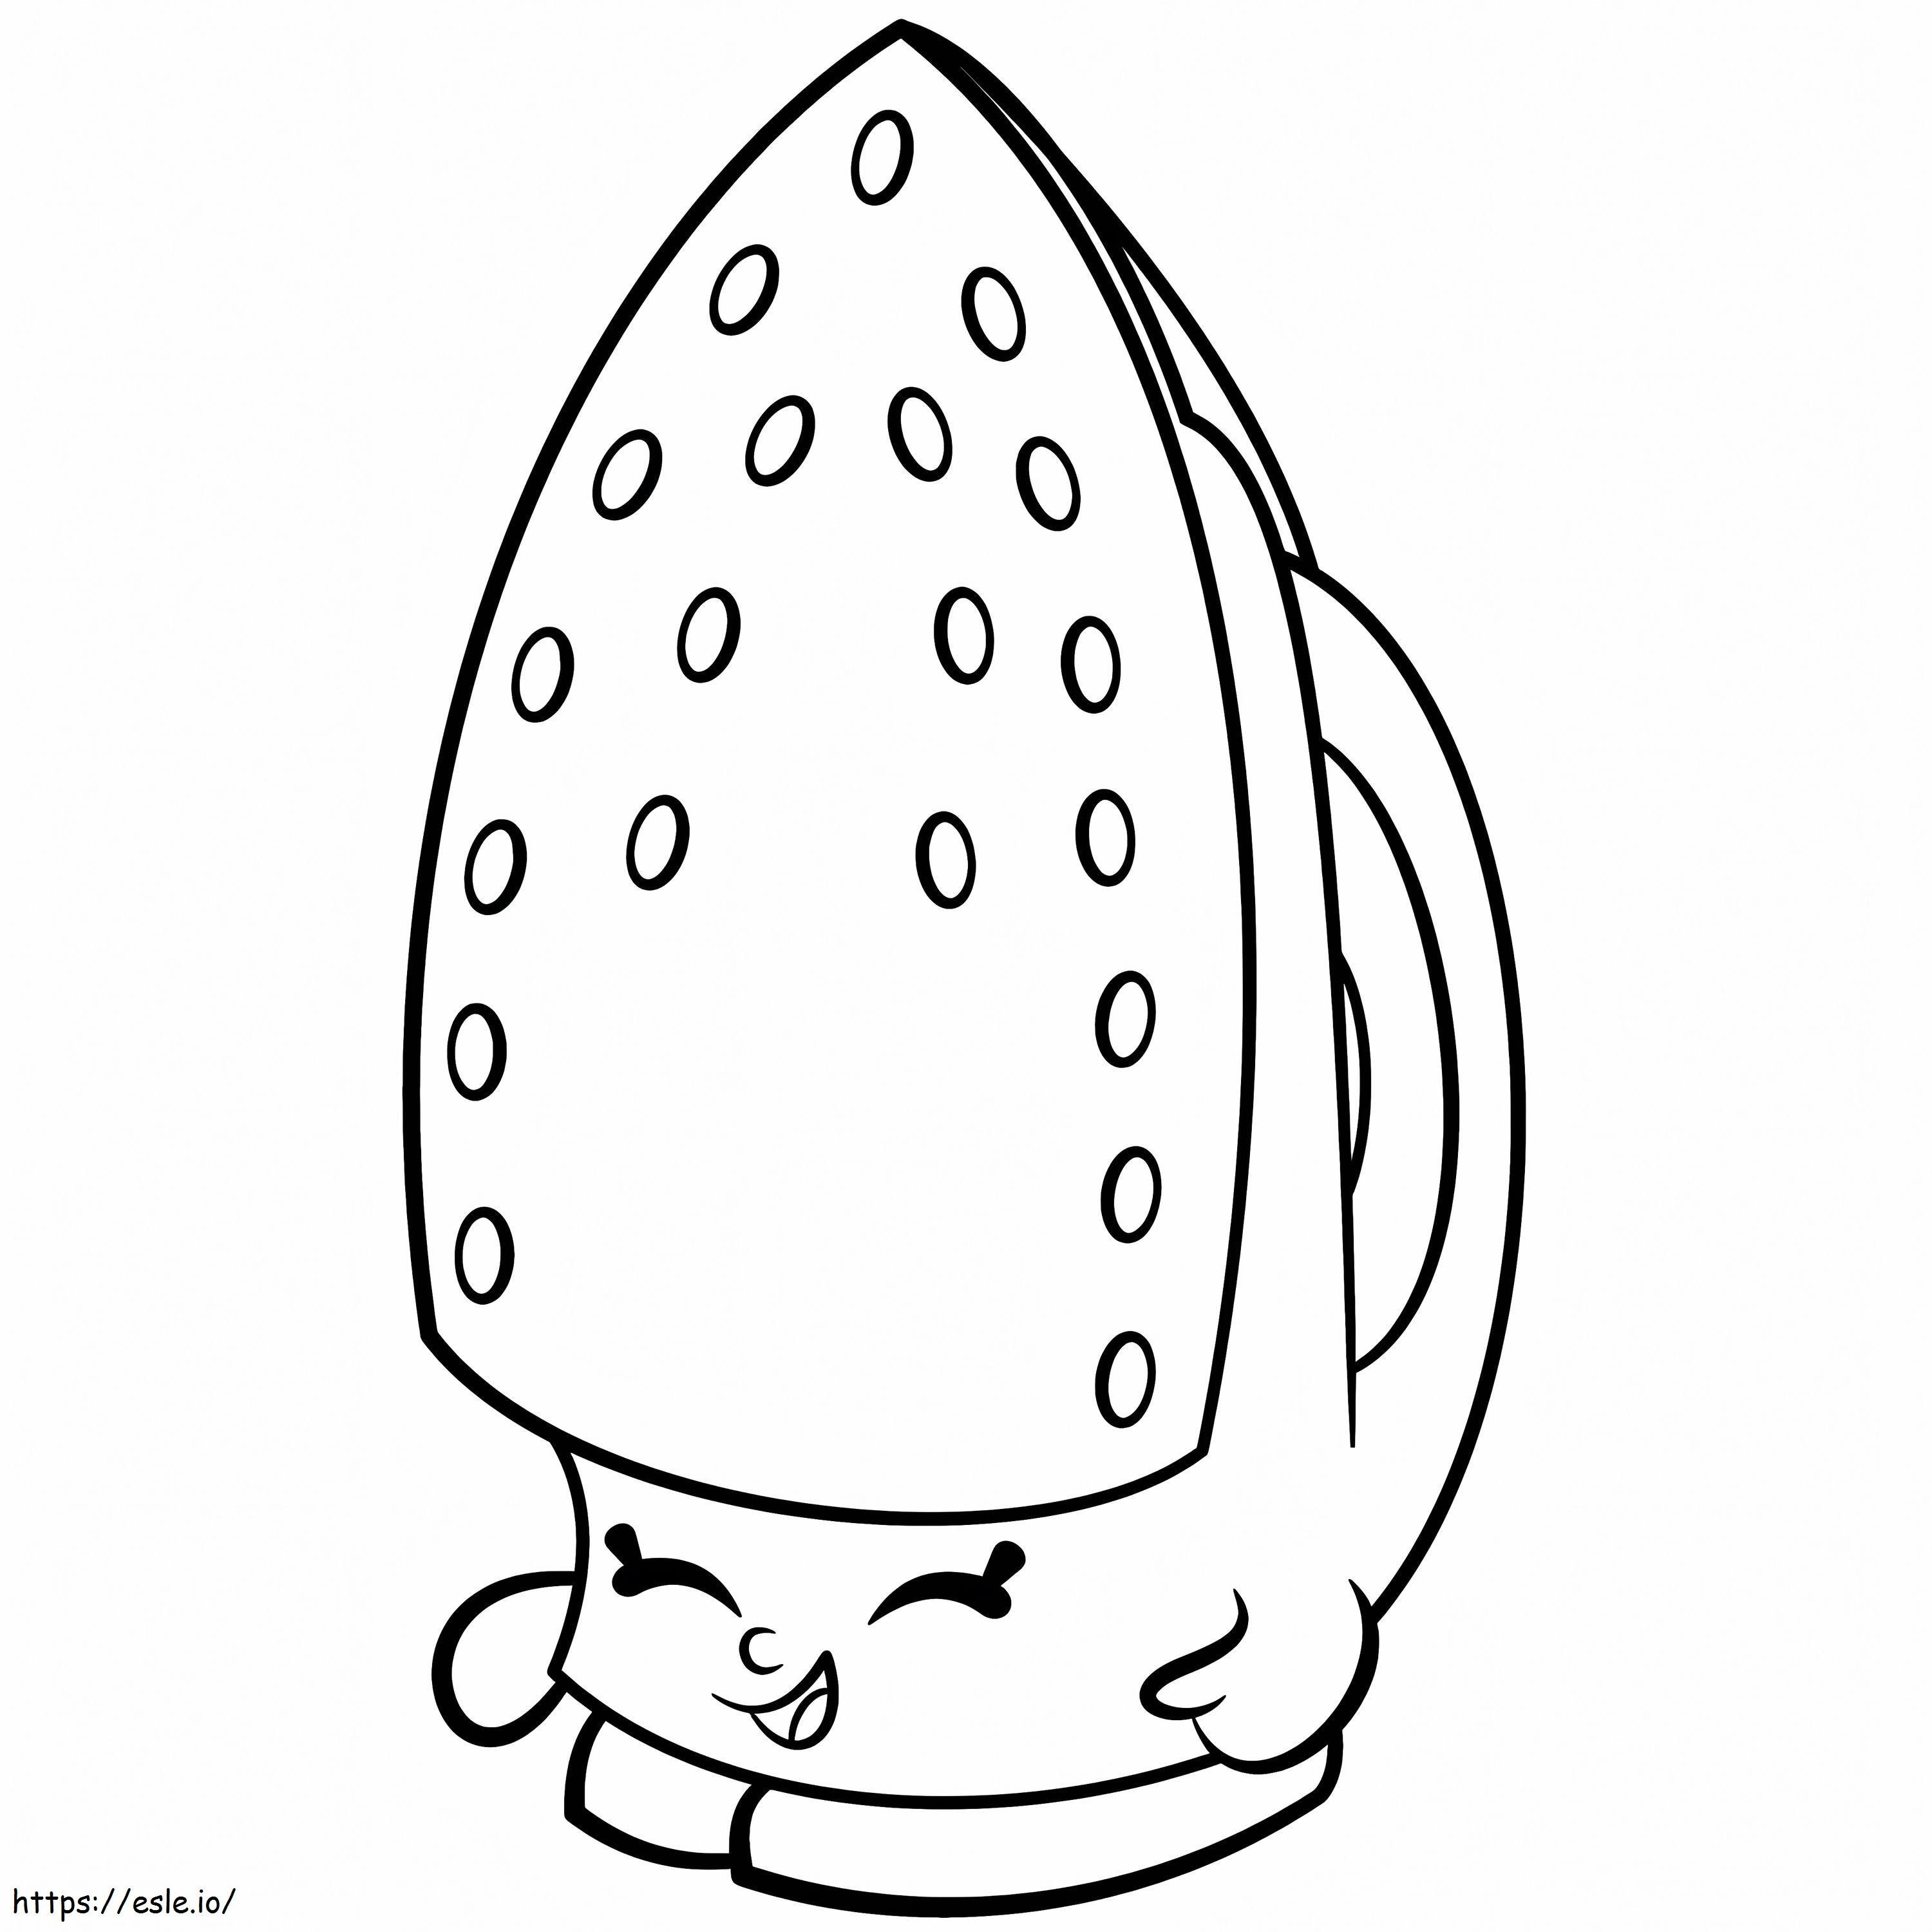 Iron Sizzles Shopkins coloring page